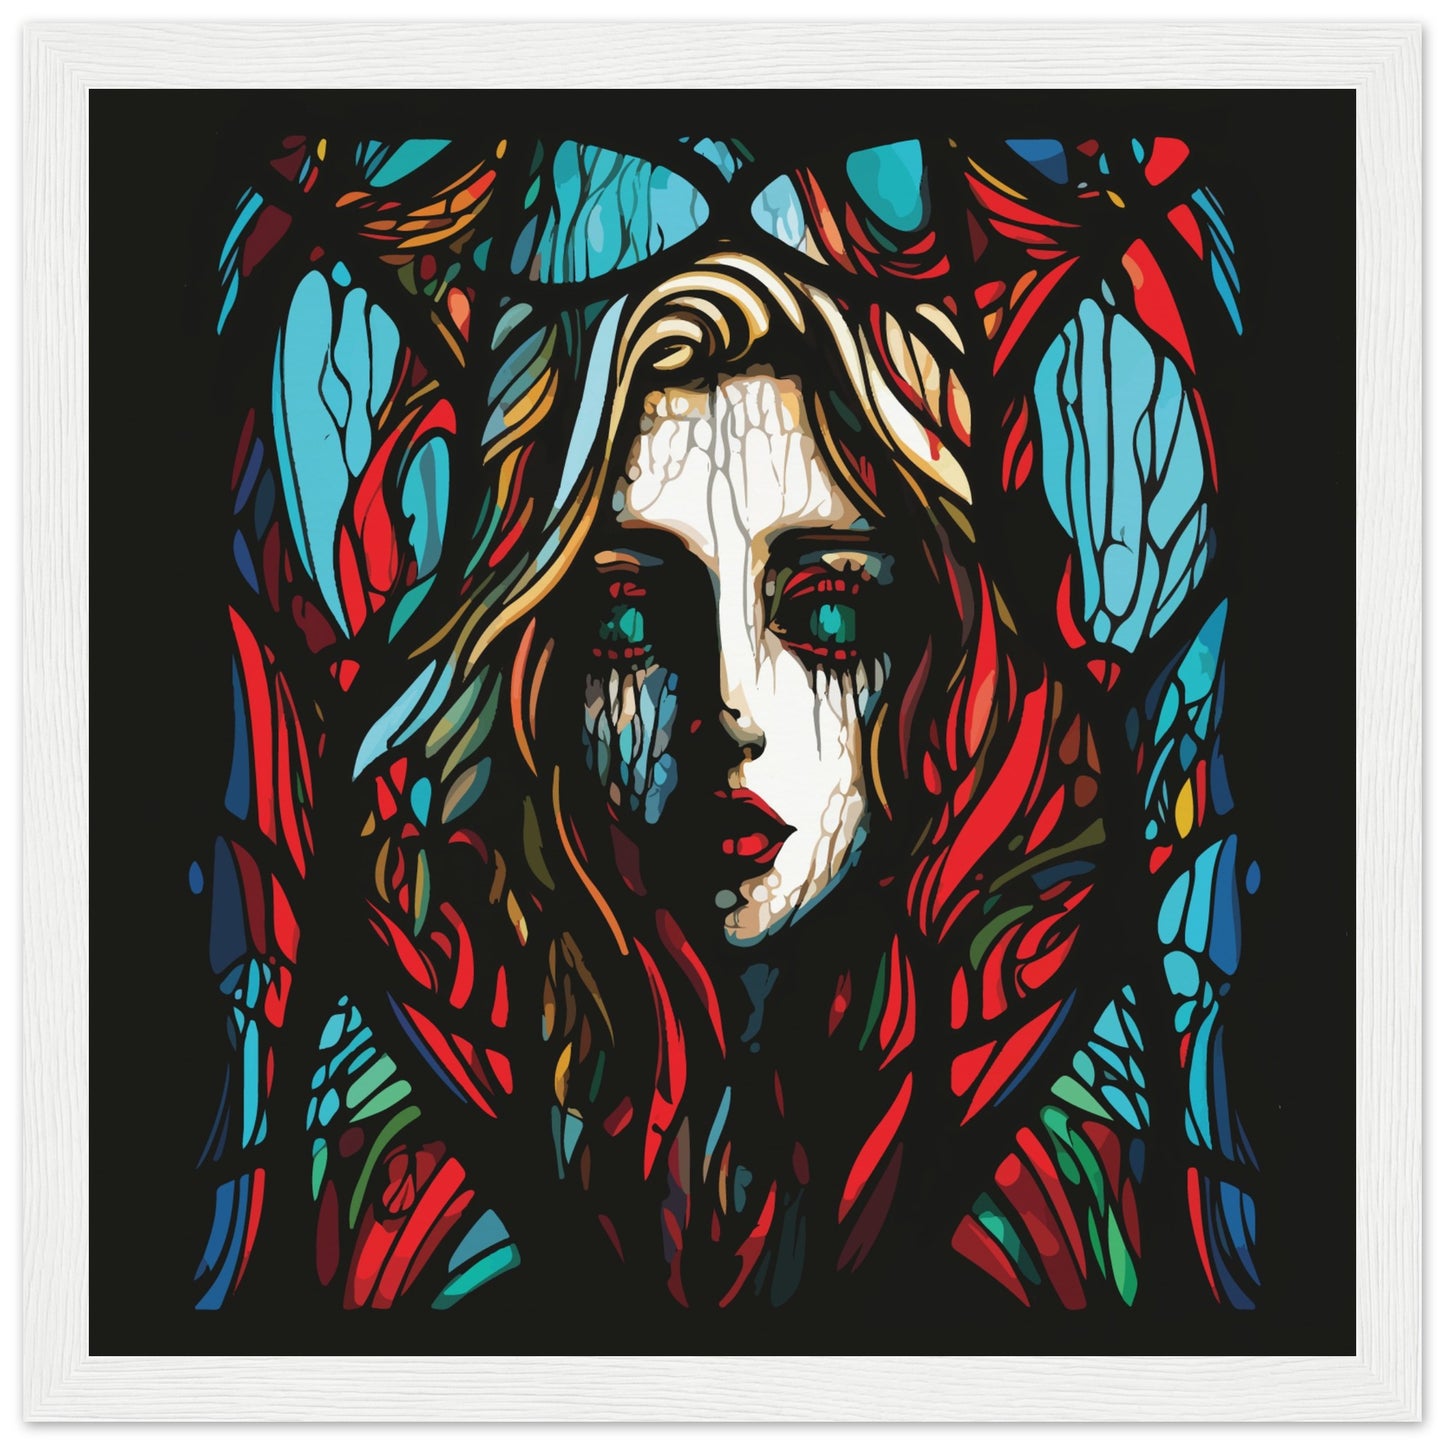 Stained glass